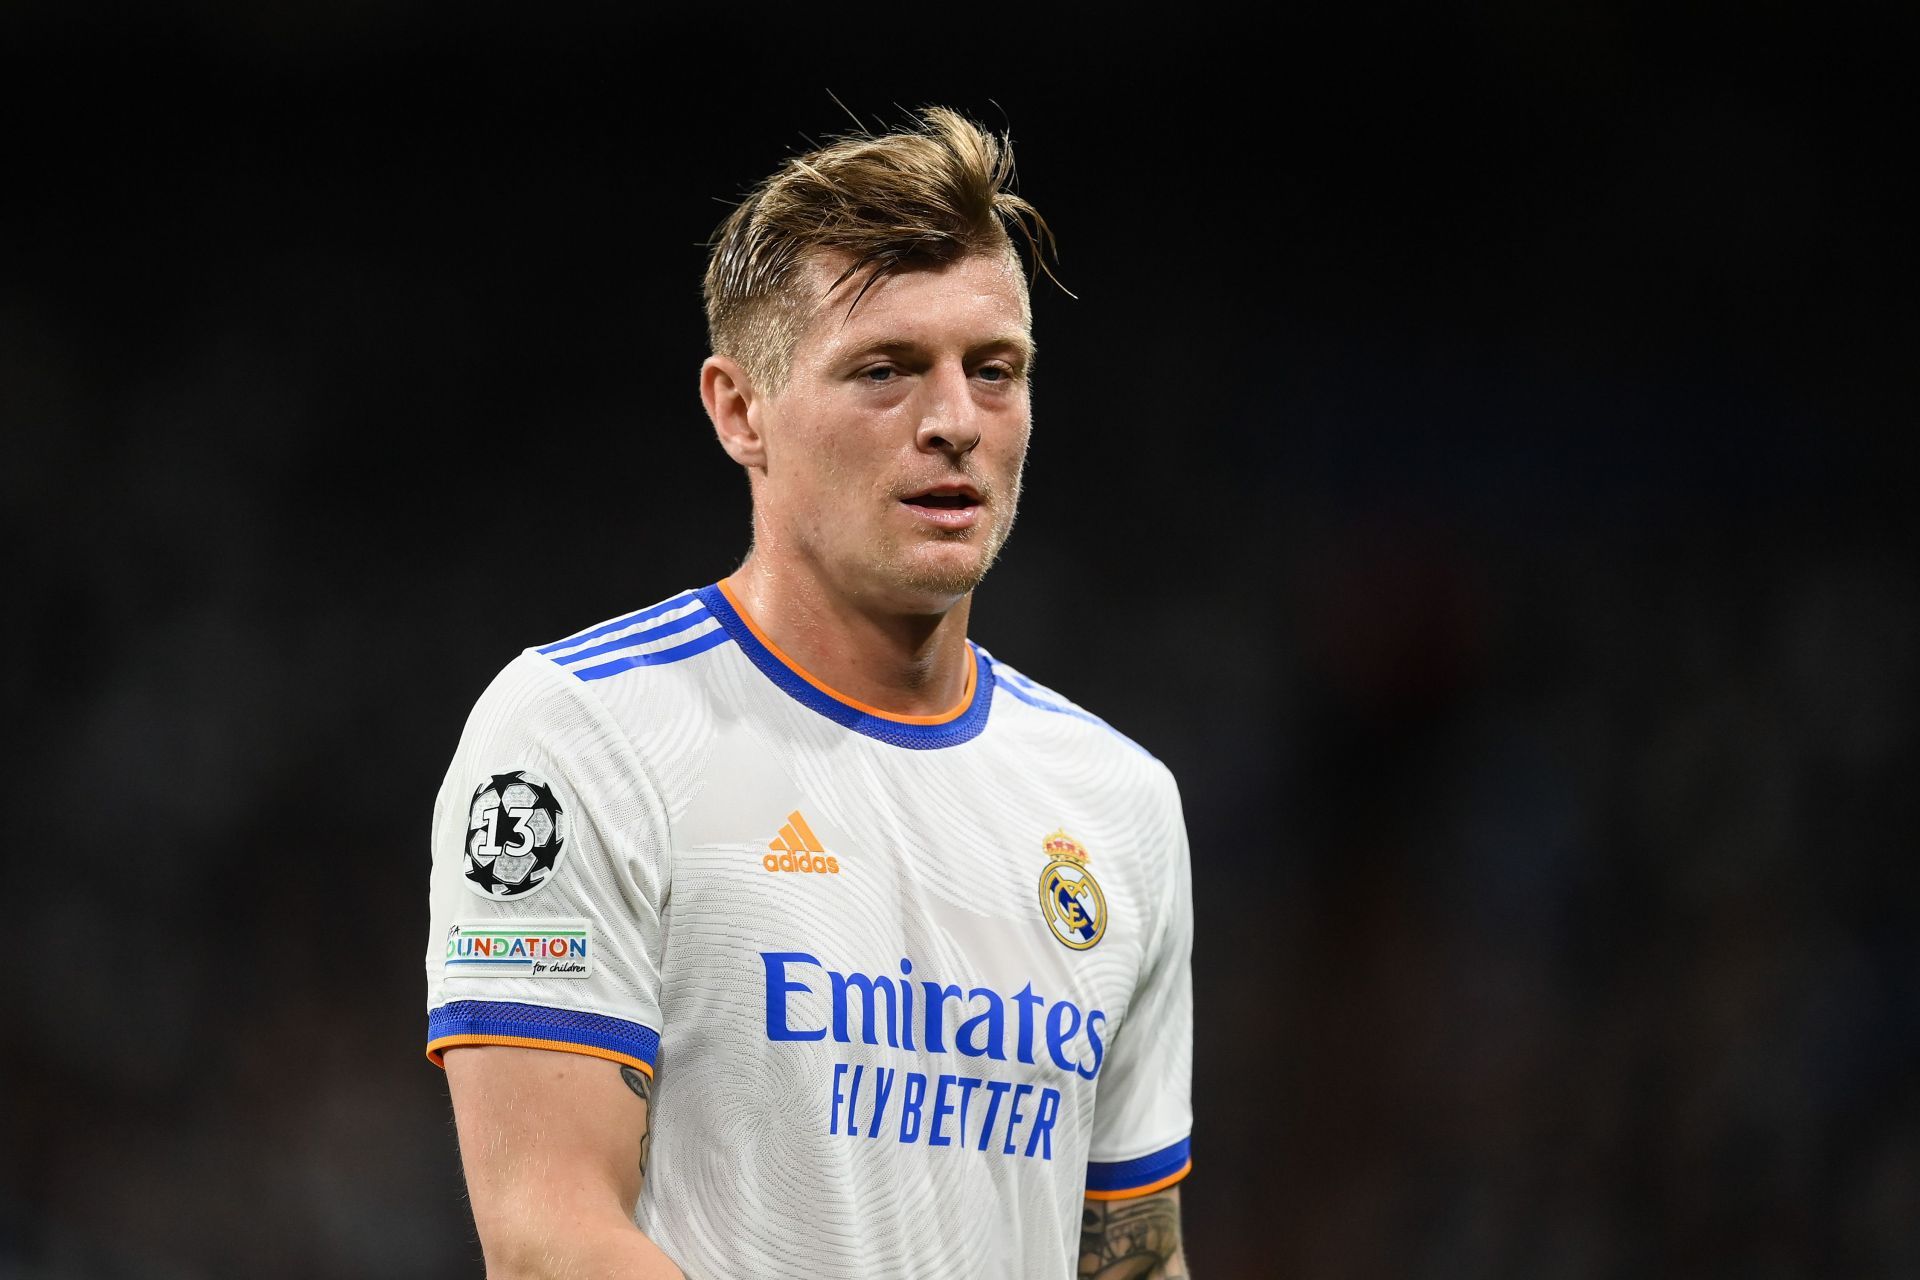 Toni Kroos came off the bench against Espanyol.